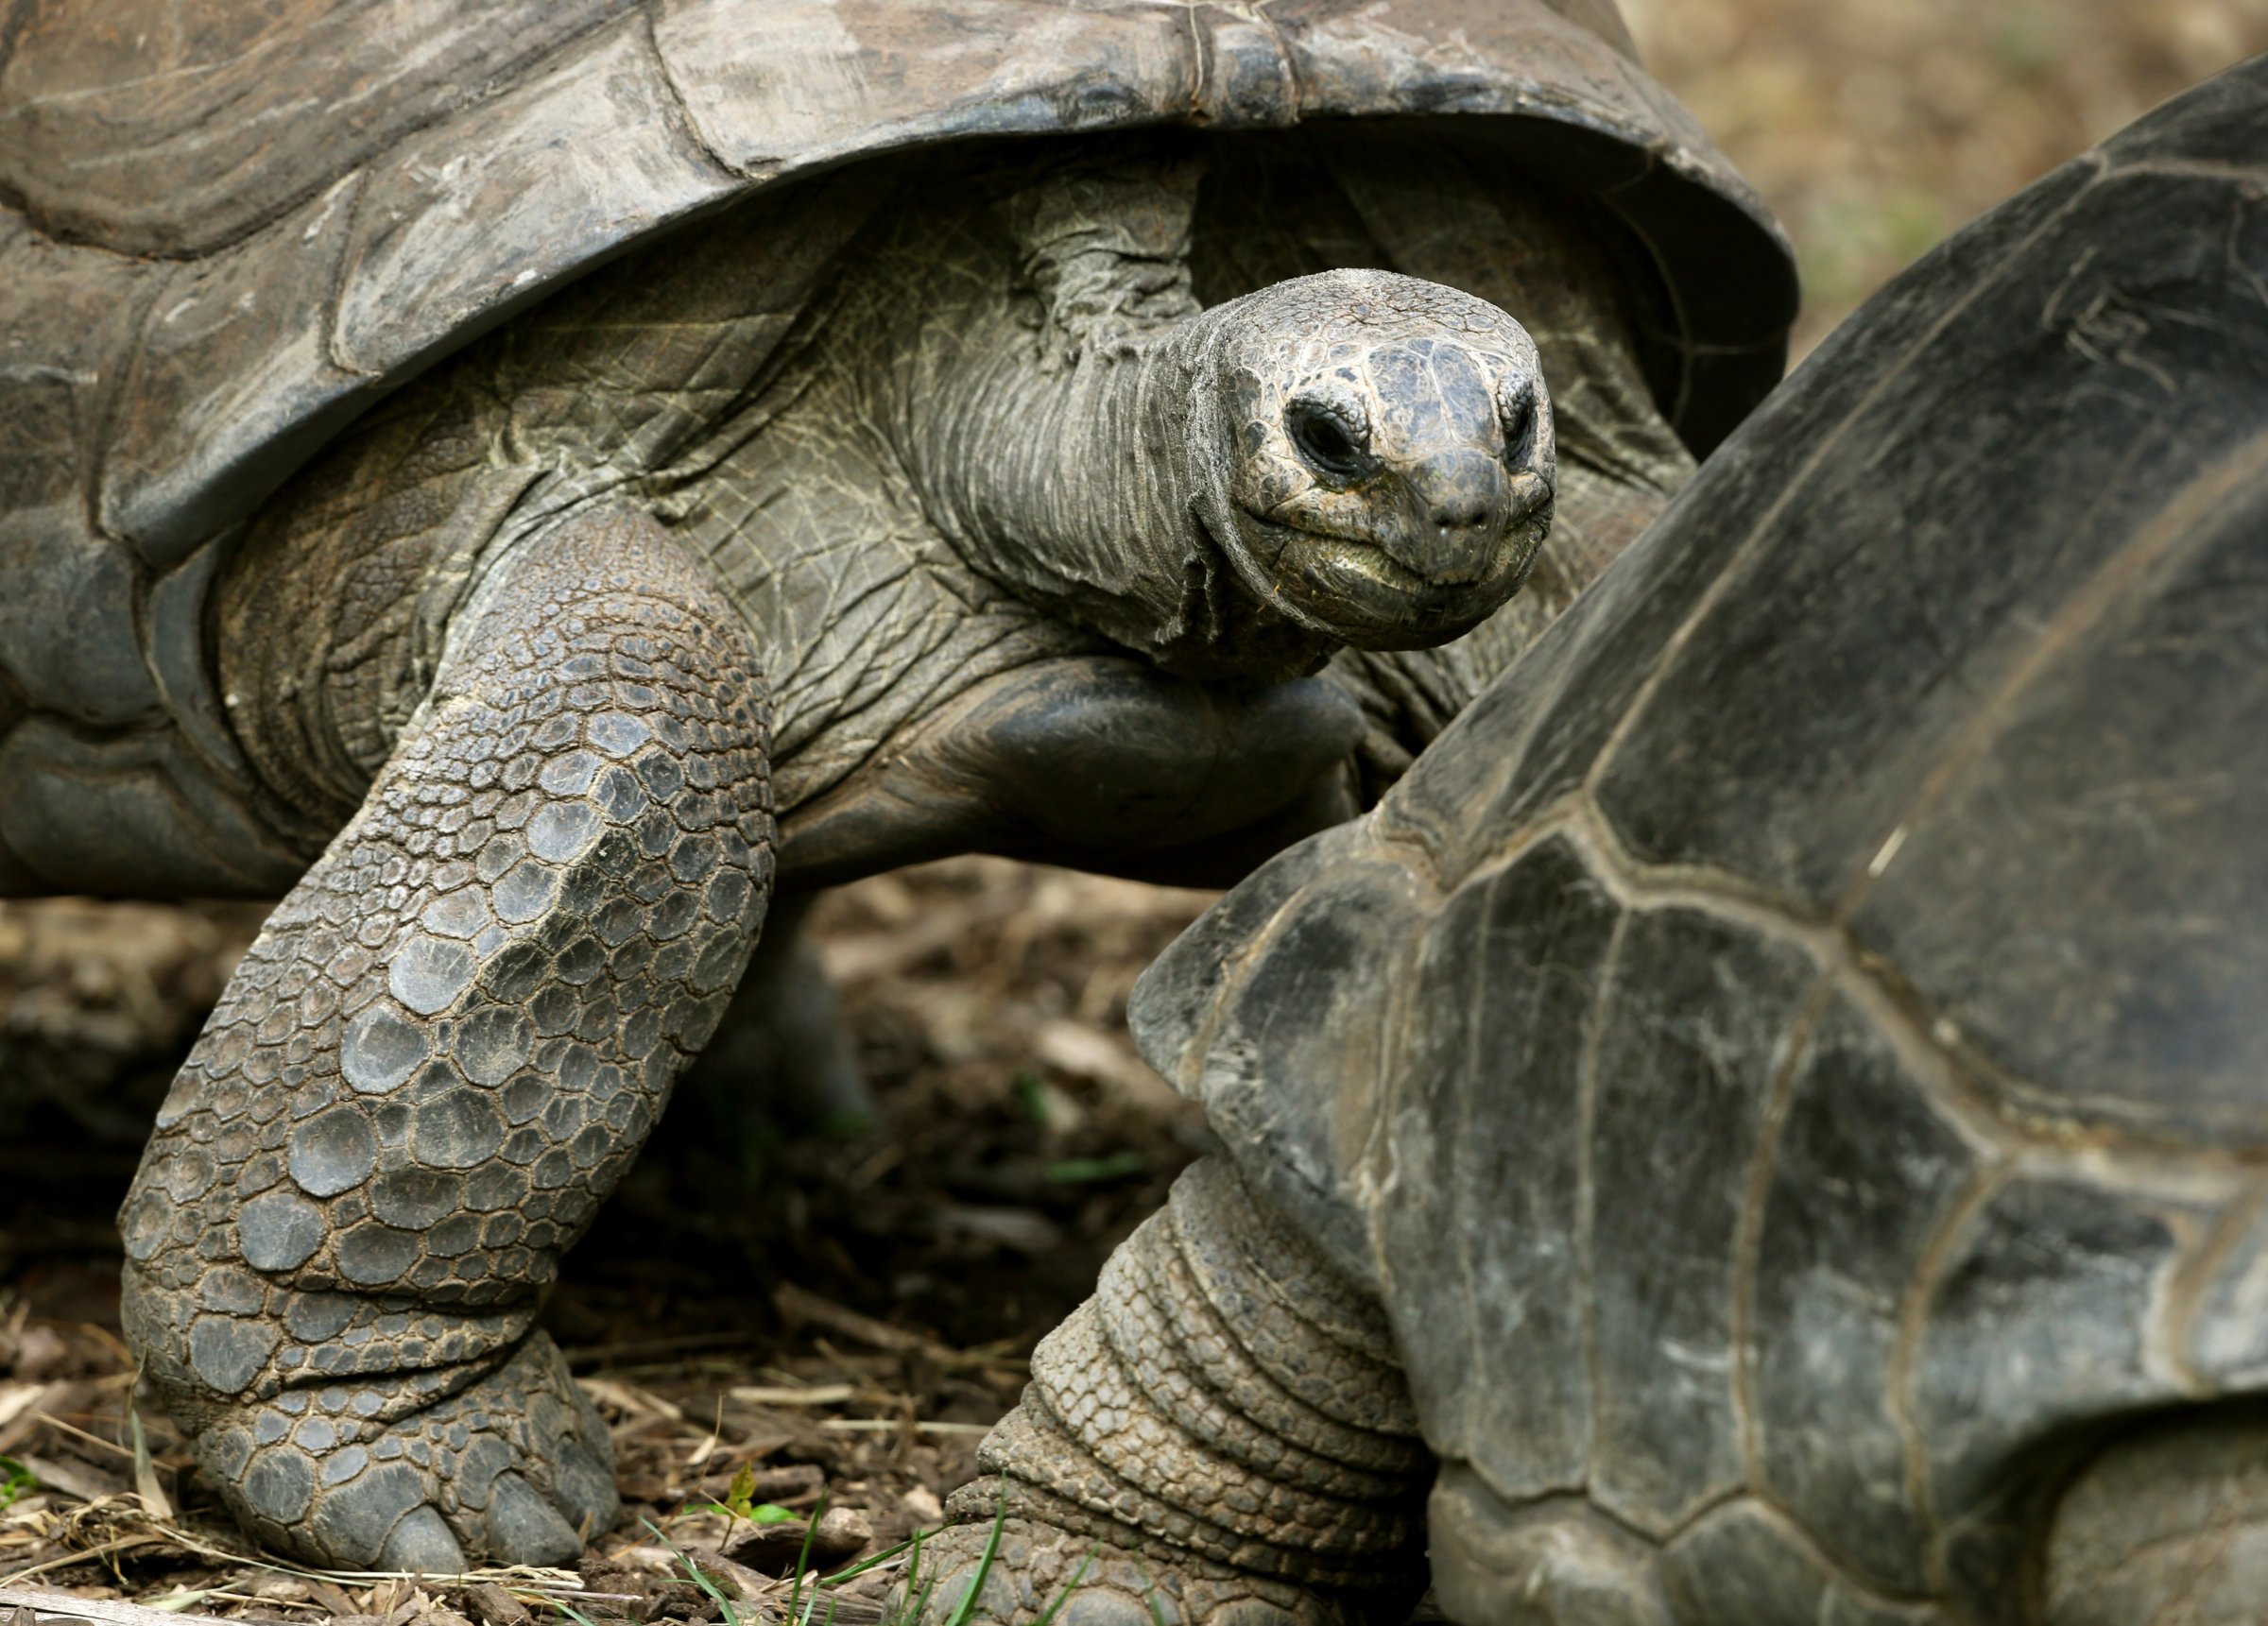 A Seychelles giant tortoise walks through its enclosure at the zoo in Duisburg, Germany, on March 31, 2014.